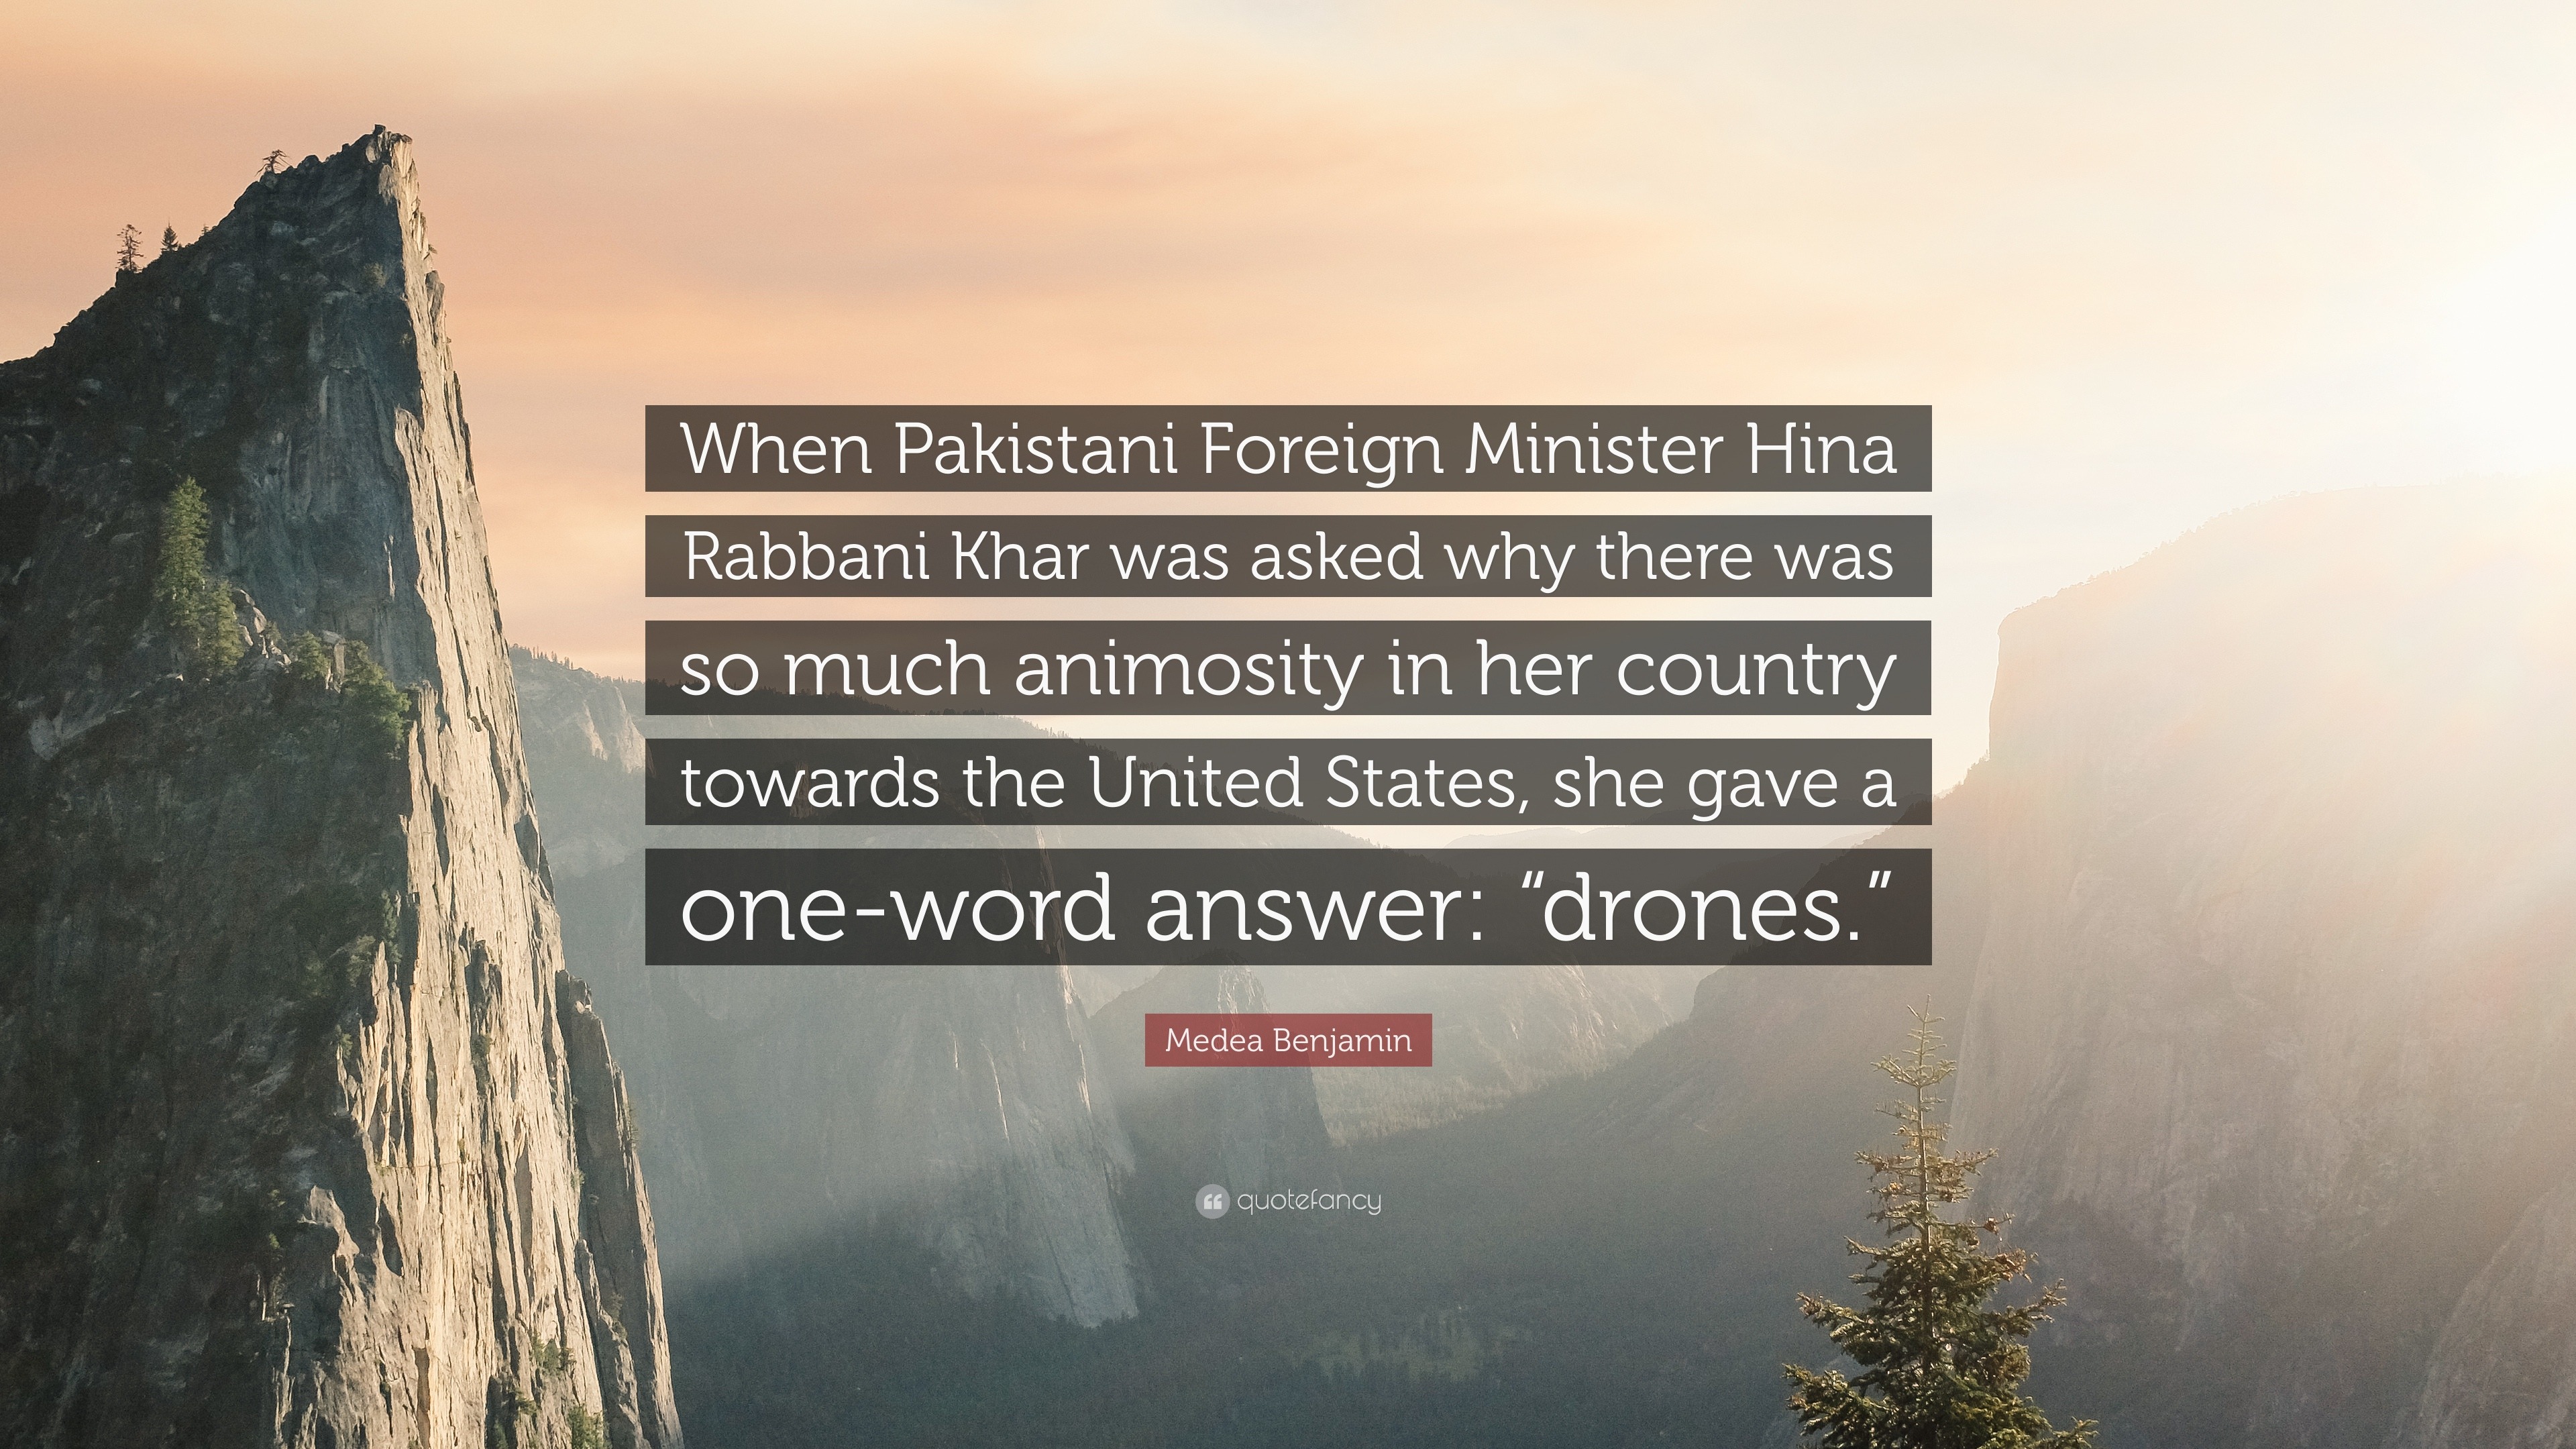 Medea Benjamin Quote: â€œWhen Pakistani Foreign Minister Hina Rabbani Khar  was asked why there was so much animosity in her country towards the U...â€